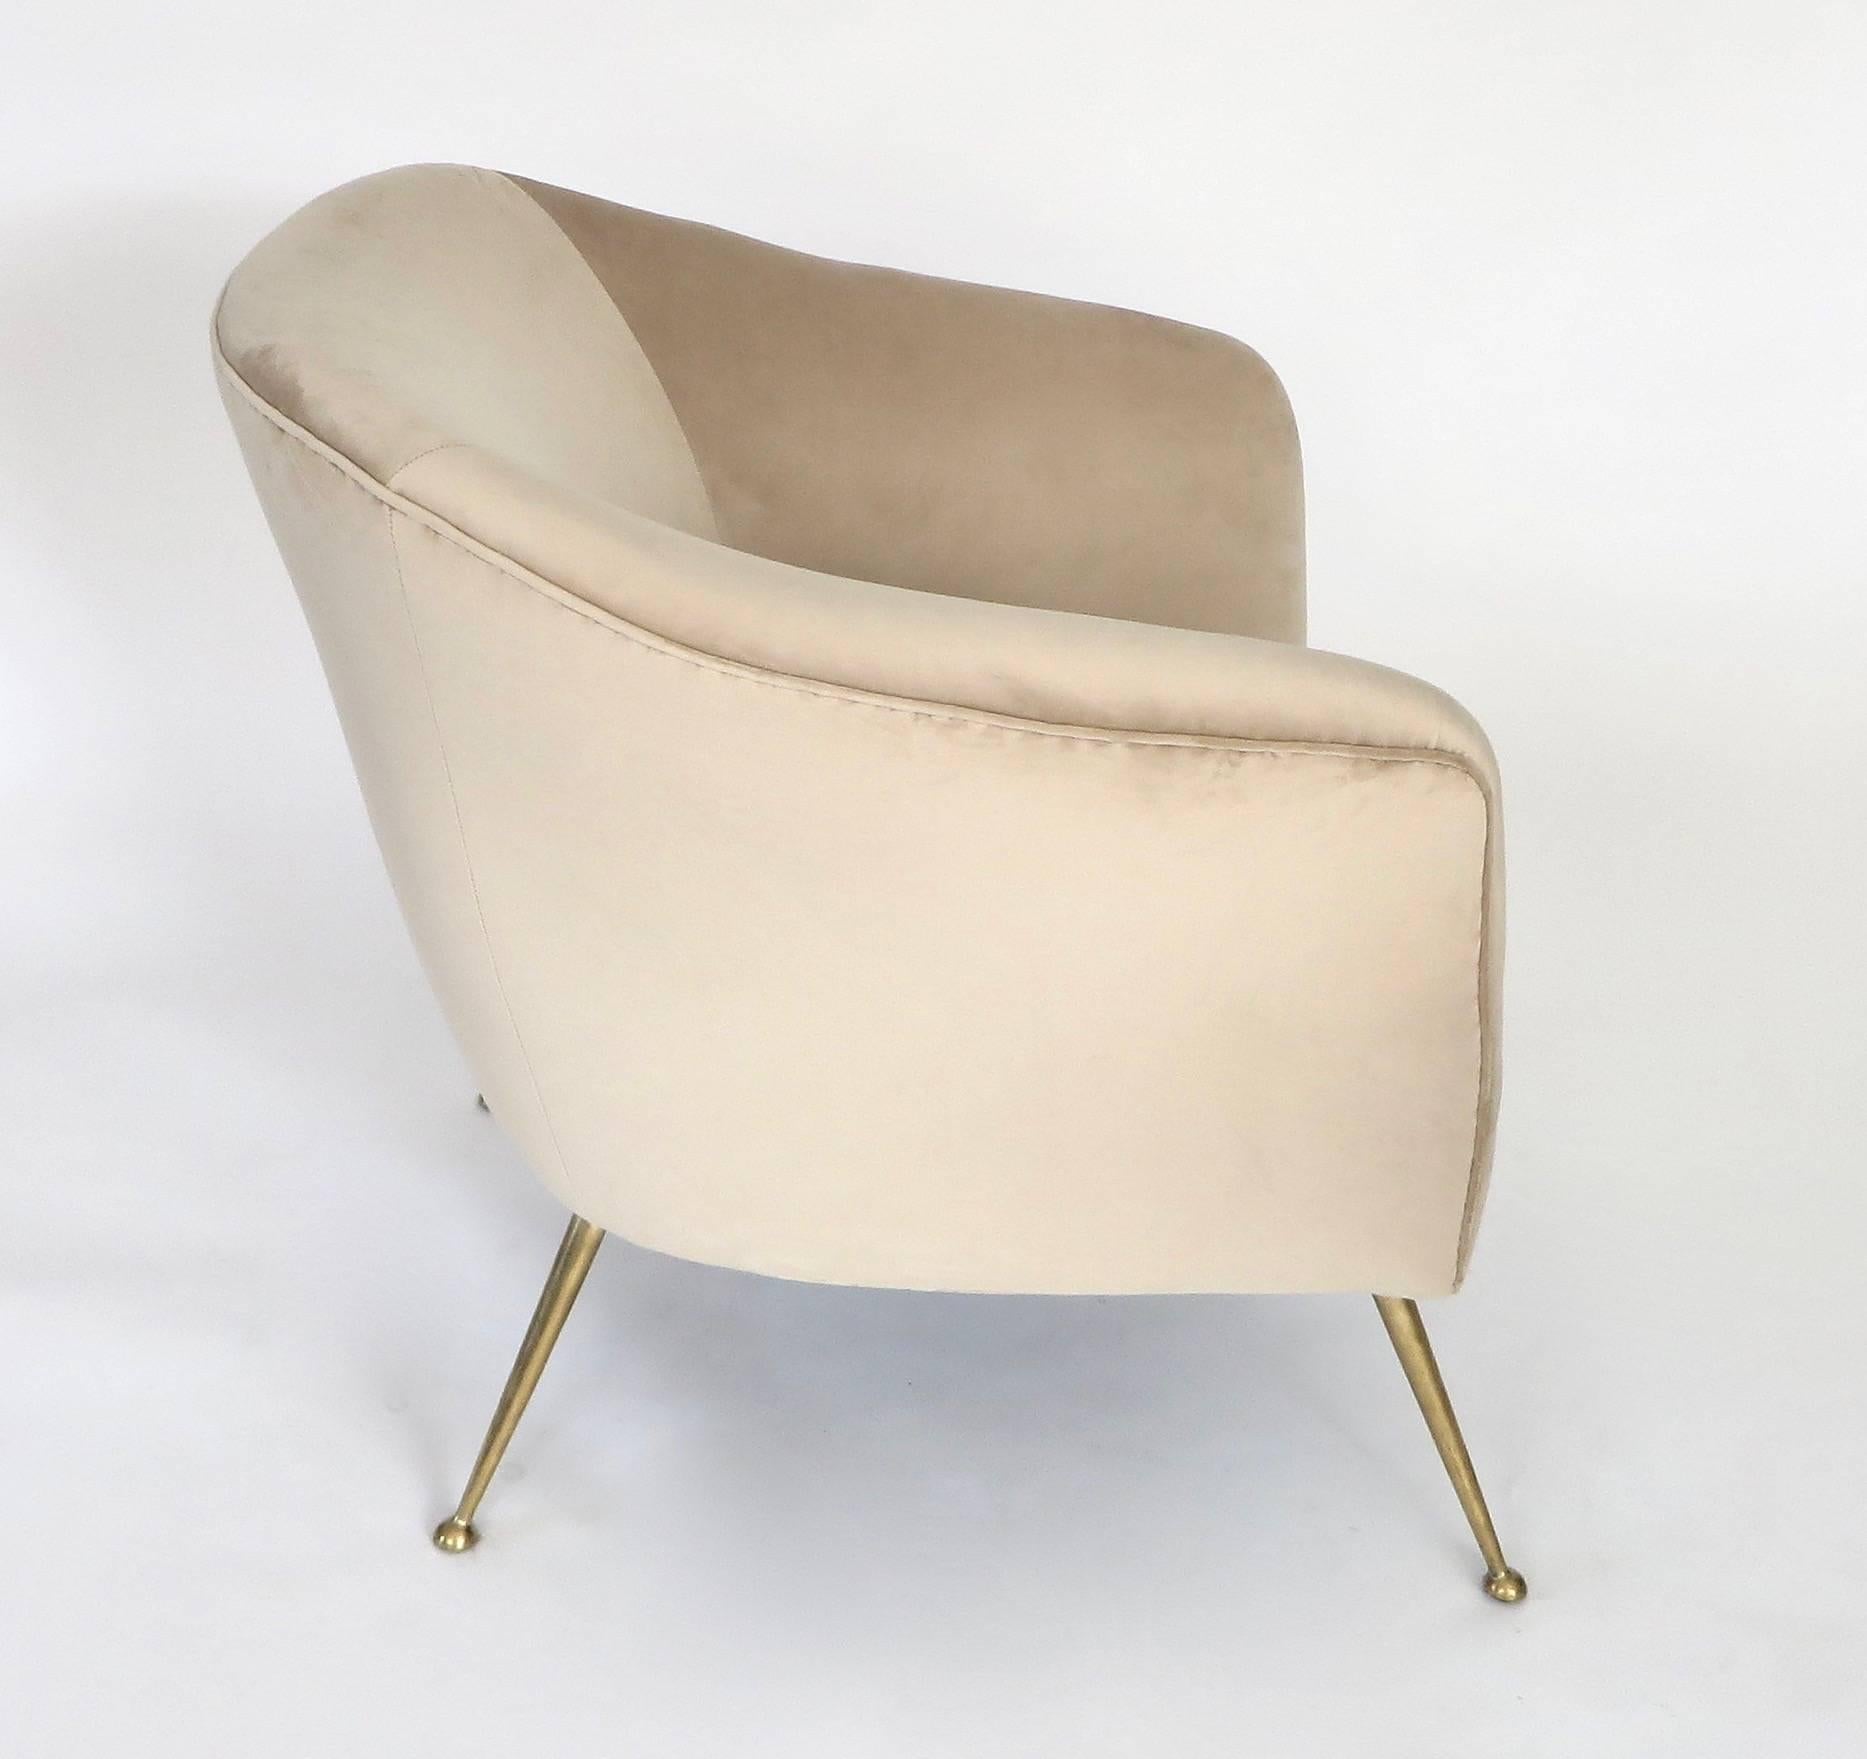 A pair of Isa Bergamo, Italian lounge chairs reupholstered in a pale champagne color silk velvet on polished brass legs. 
Overall size: 28